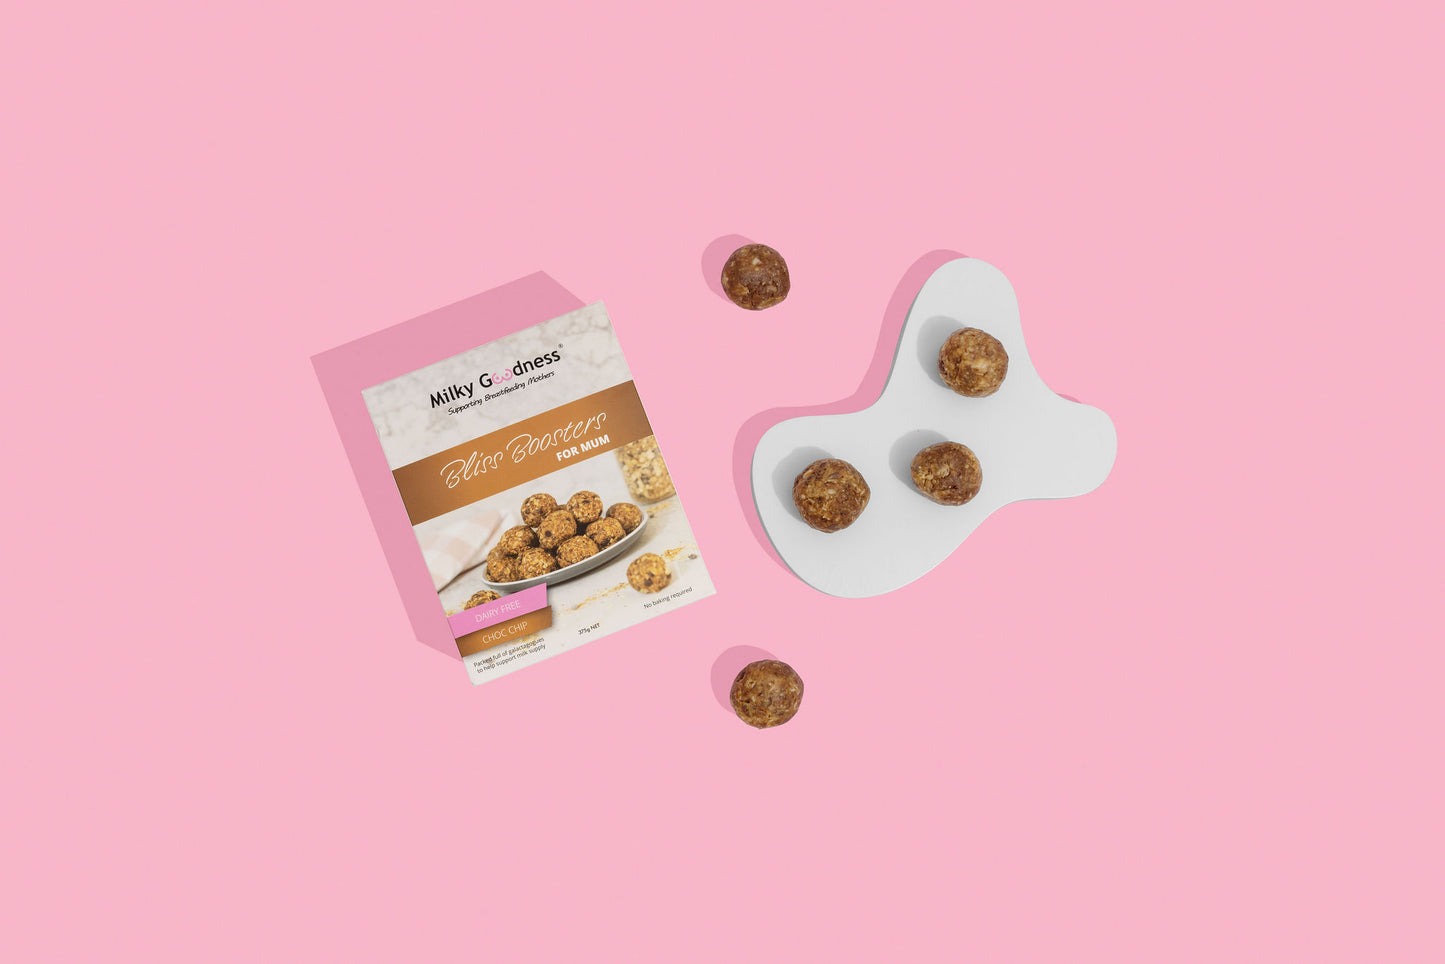 Lactation Bliss Booster Packet Mix - Choc Chip - Dairy Free